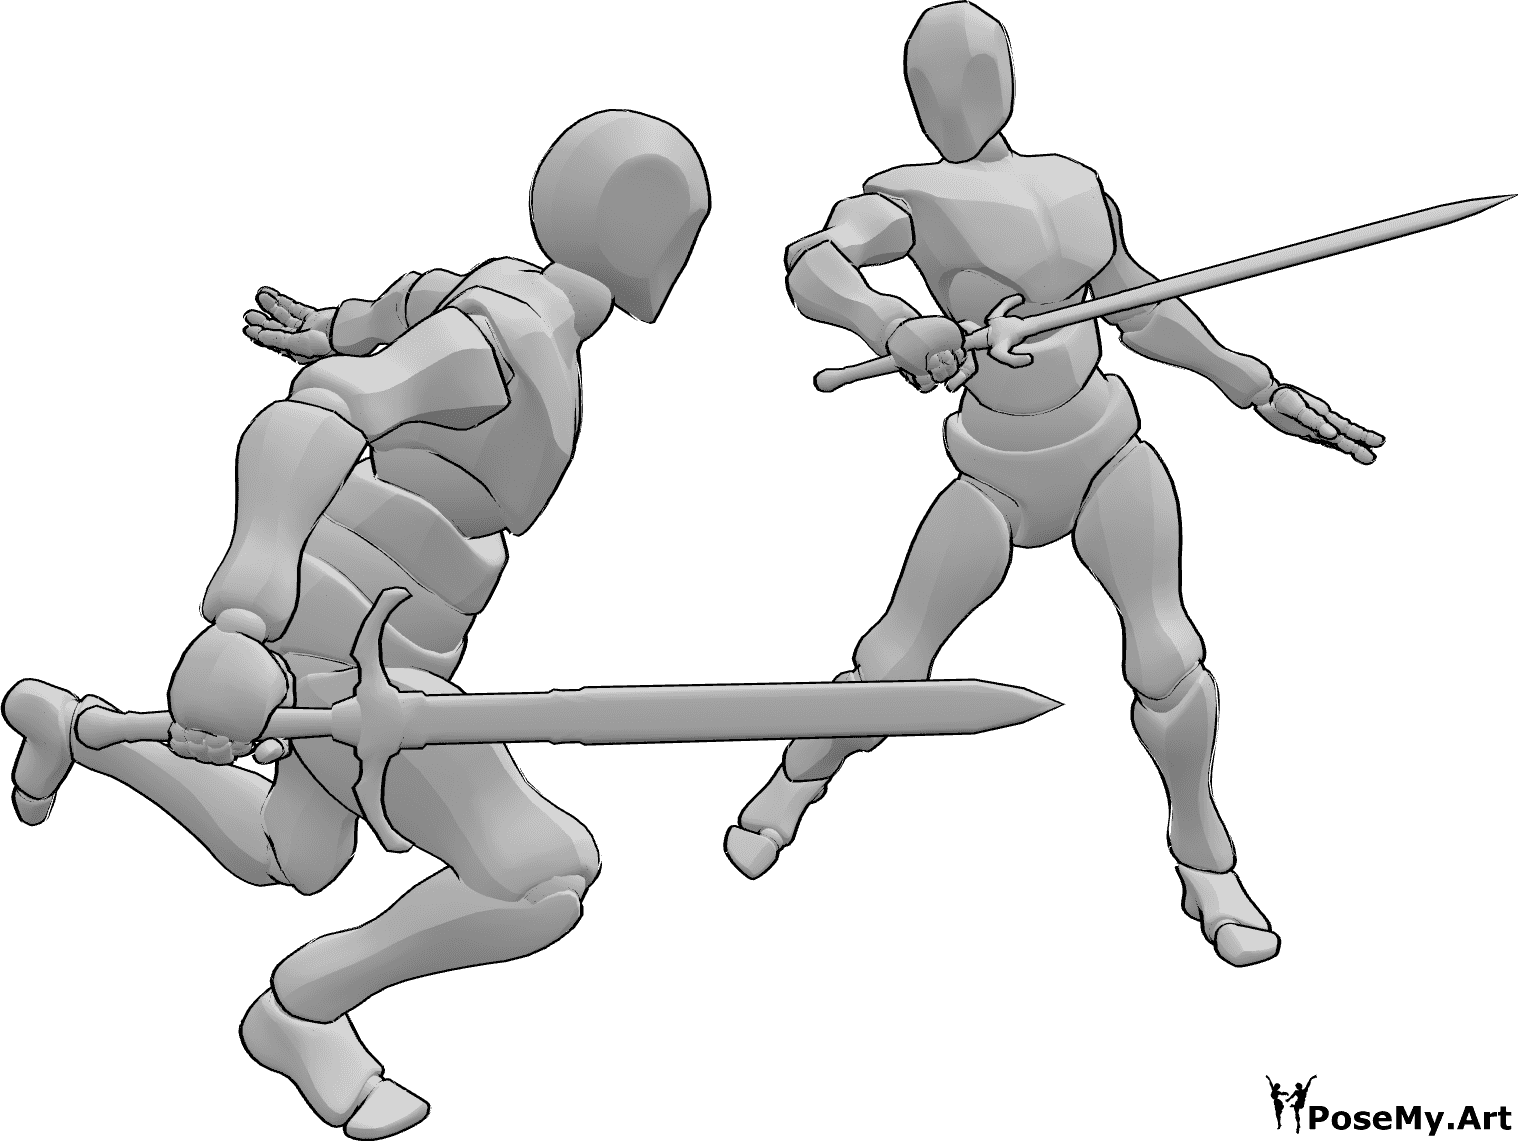 Pose Reference- Two males swords pose - Two males are fighting with swords pose